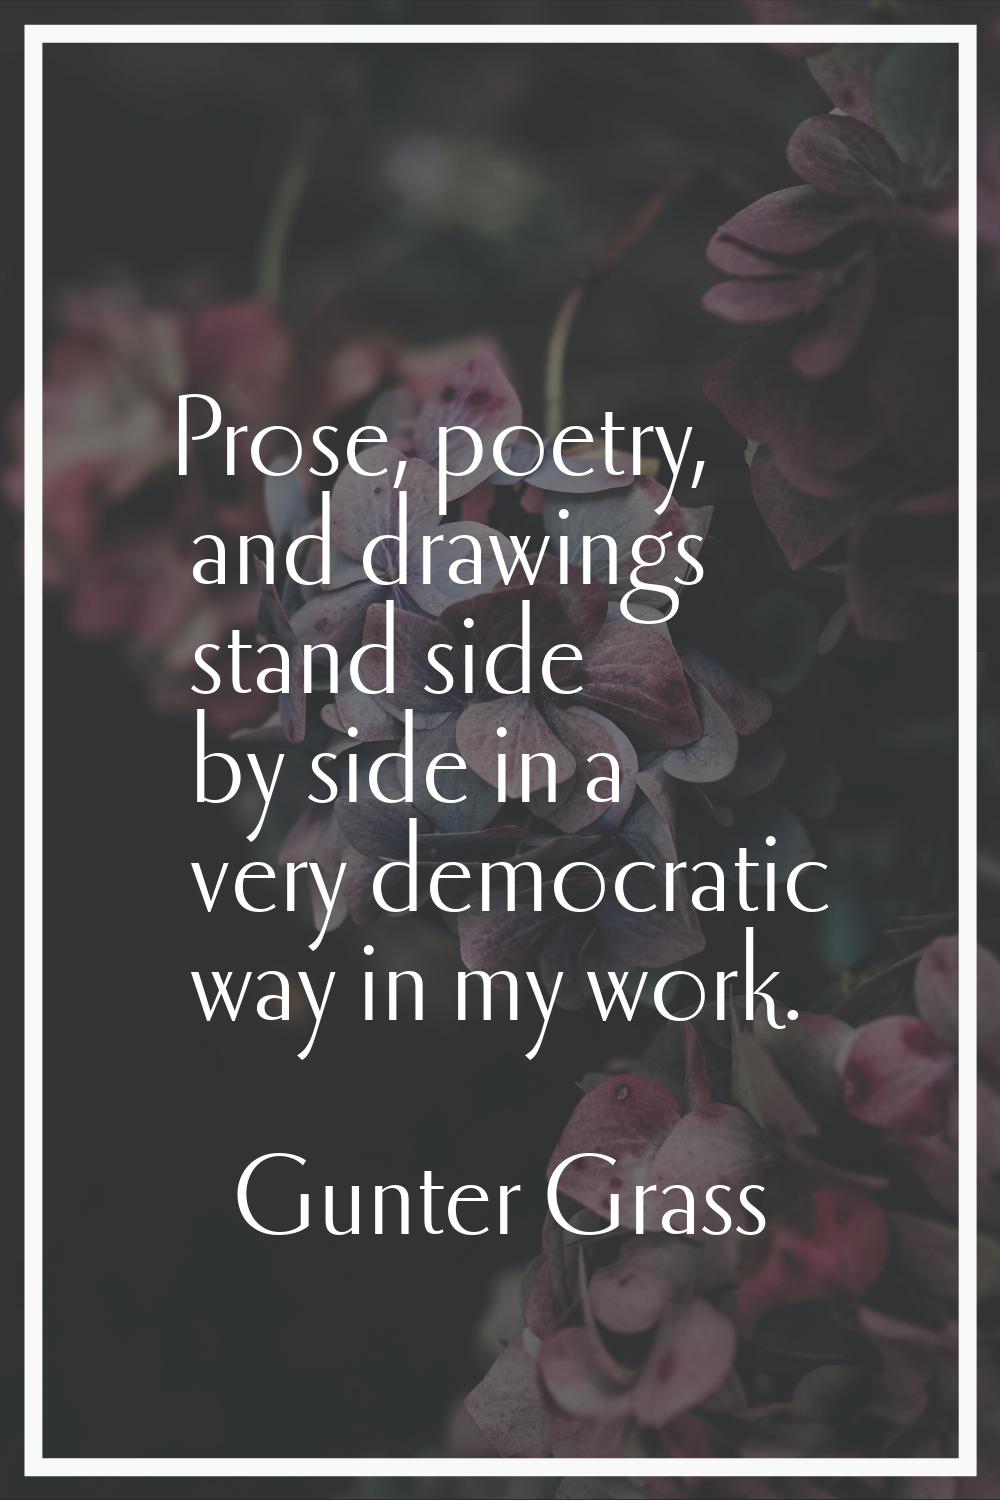 Prose, poetry, and drawings stand side by side in a very democratic way in my work.